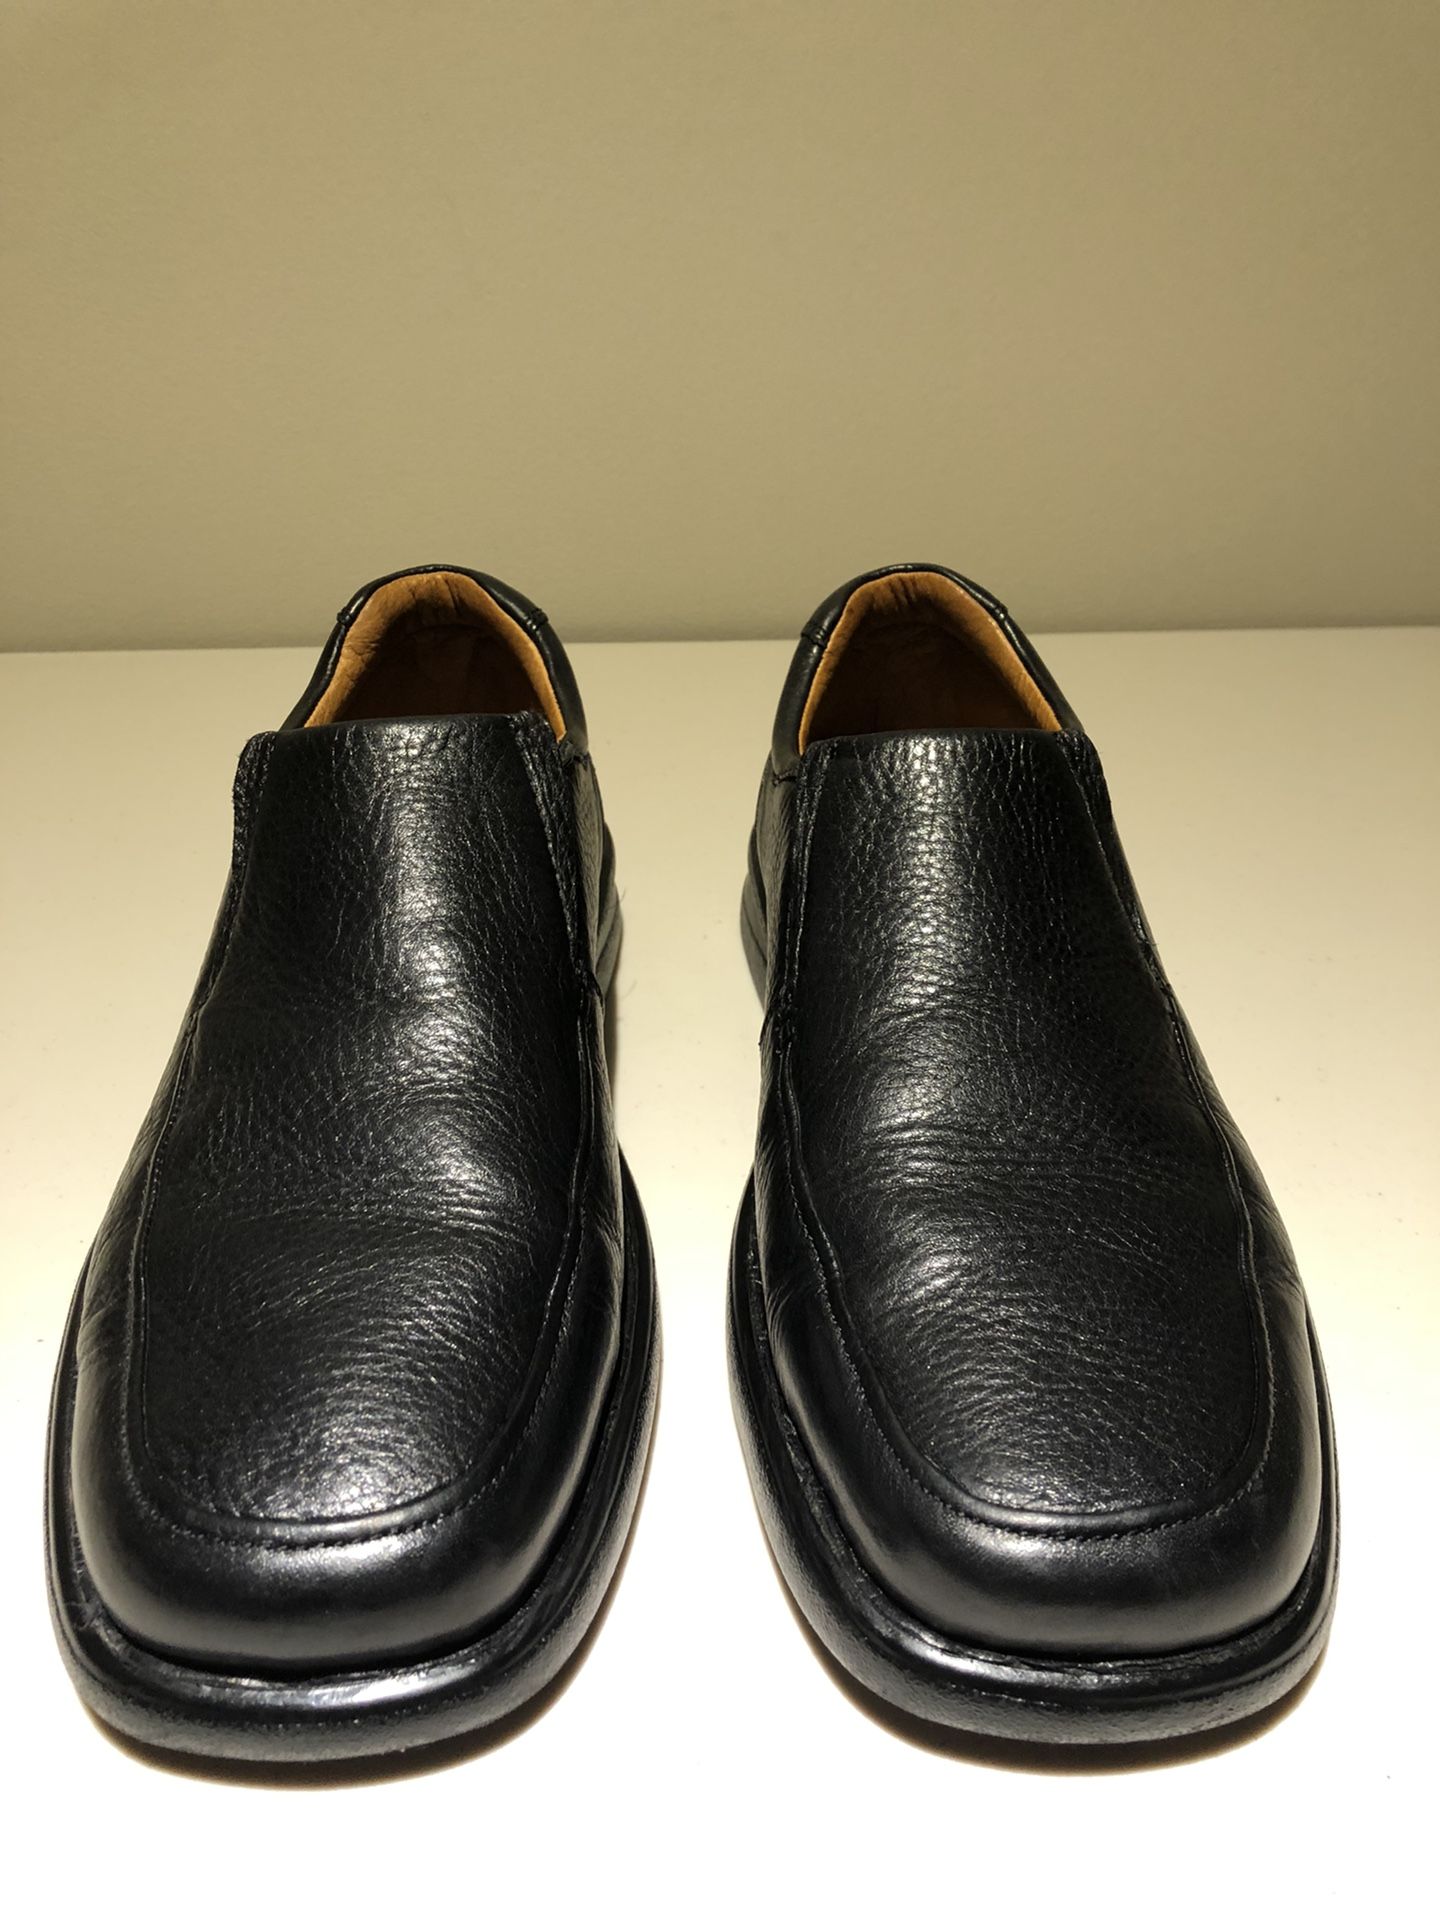 Black Leather Casual Slip On Shoe